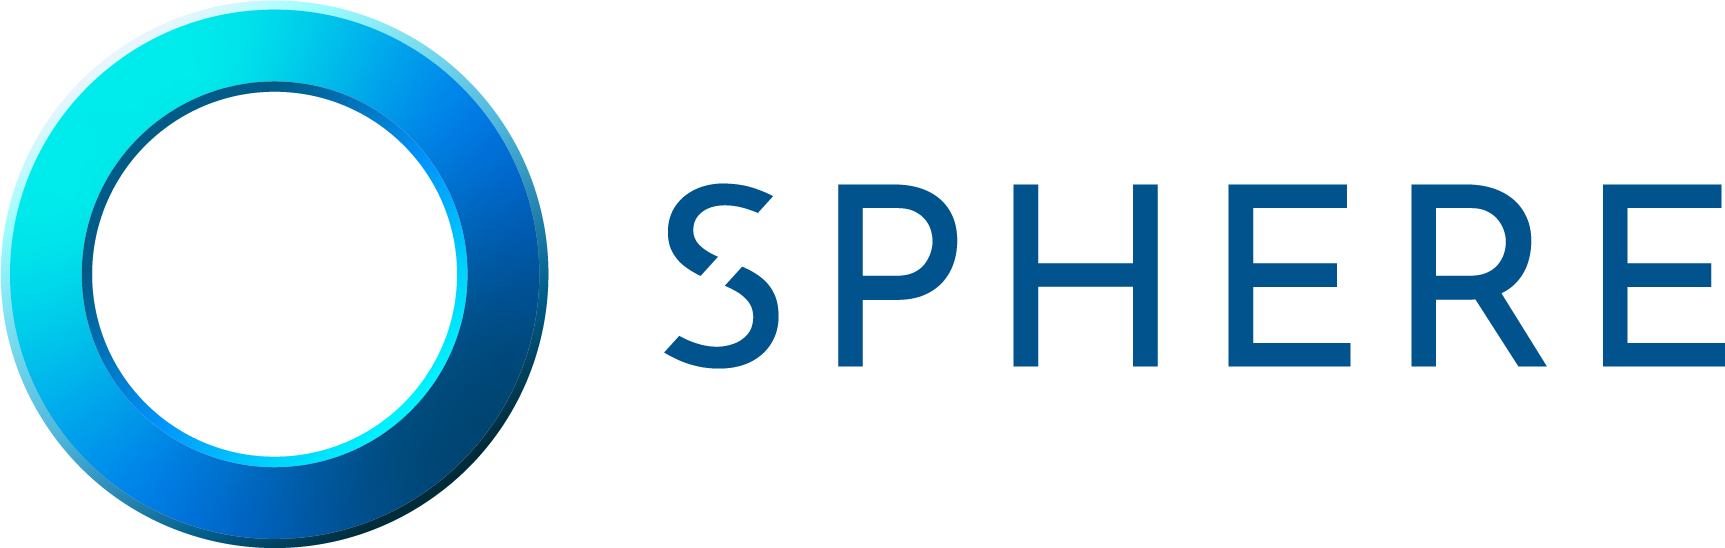 SPHERE Technology Solutions